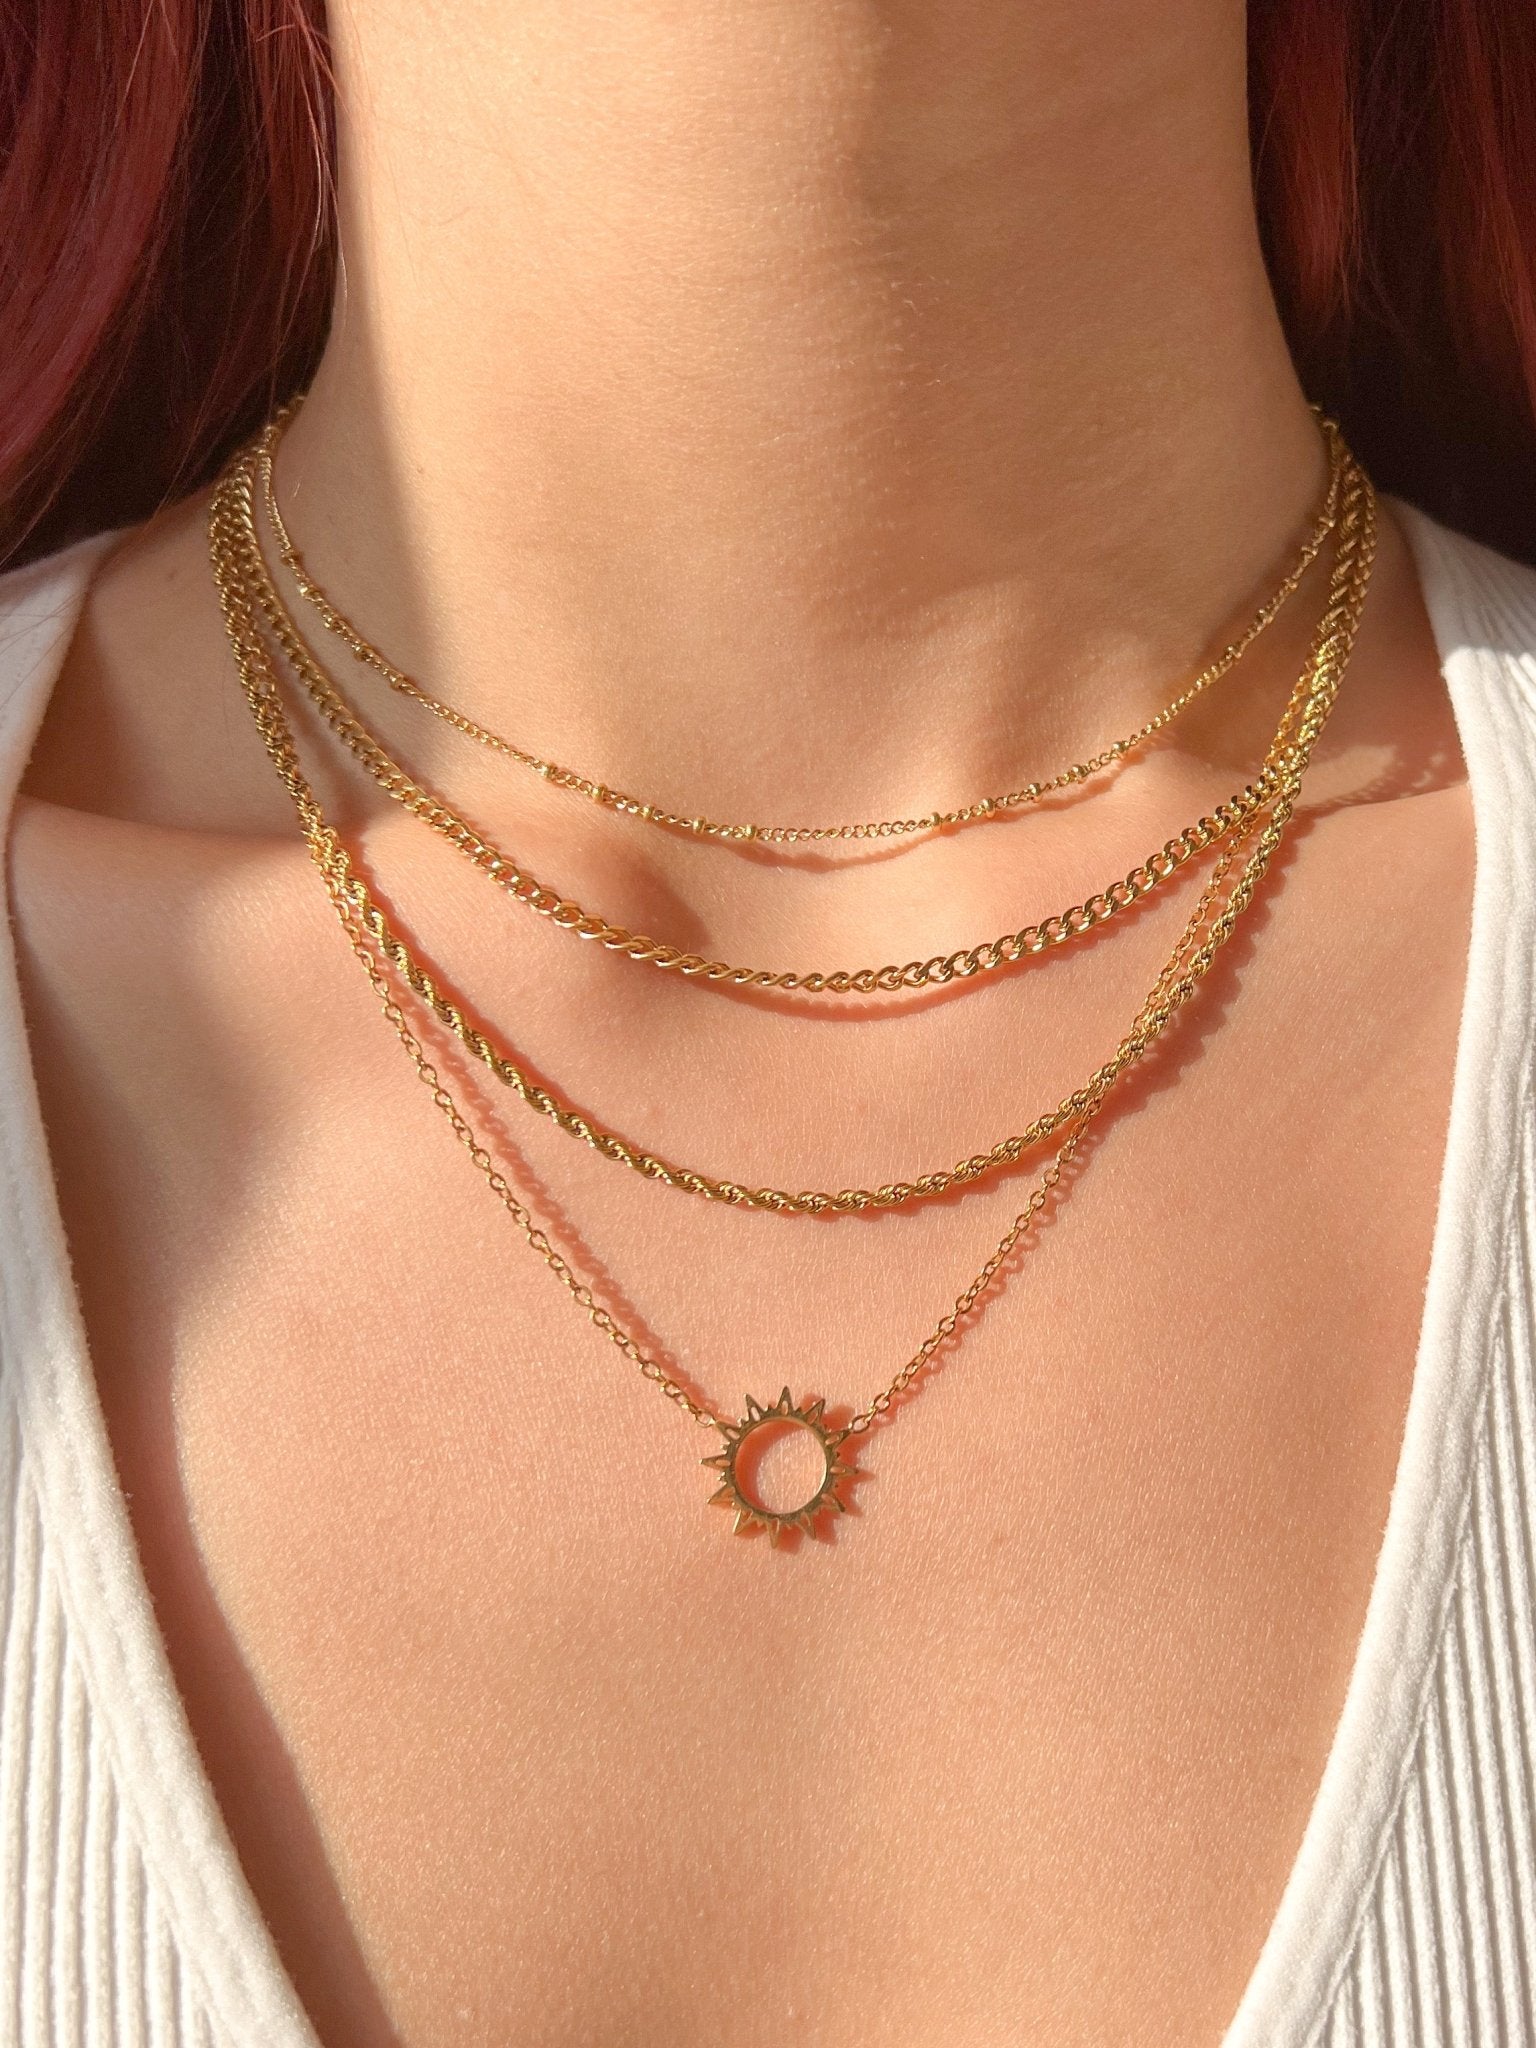 Thin Beaded Necklace in Gold - Flaire & Co.